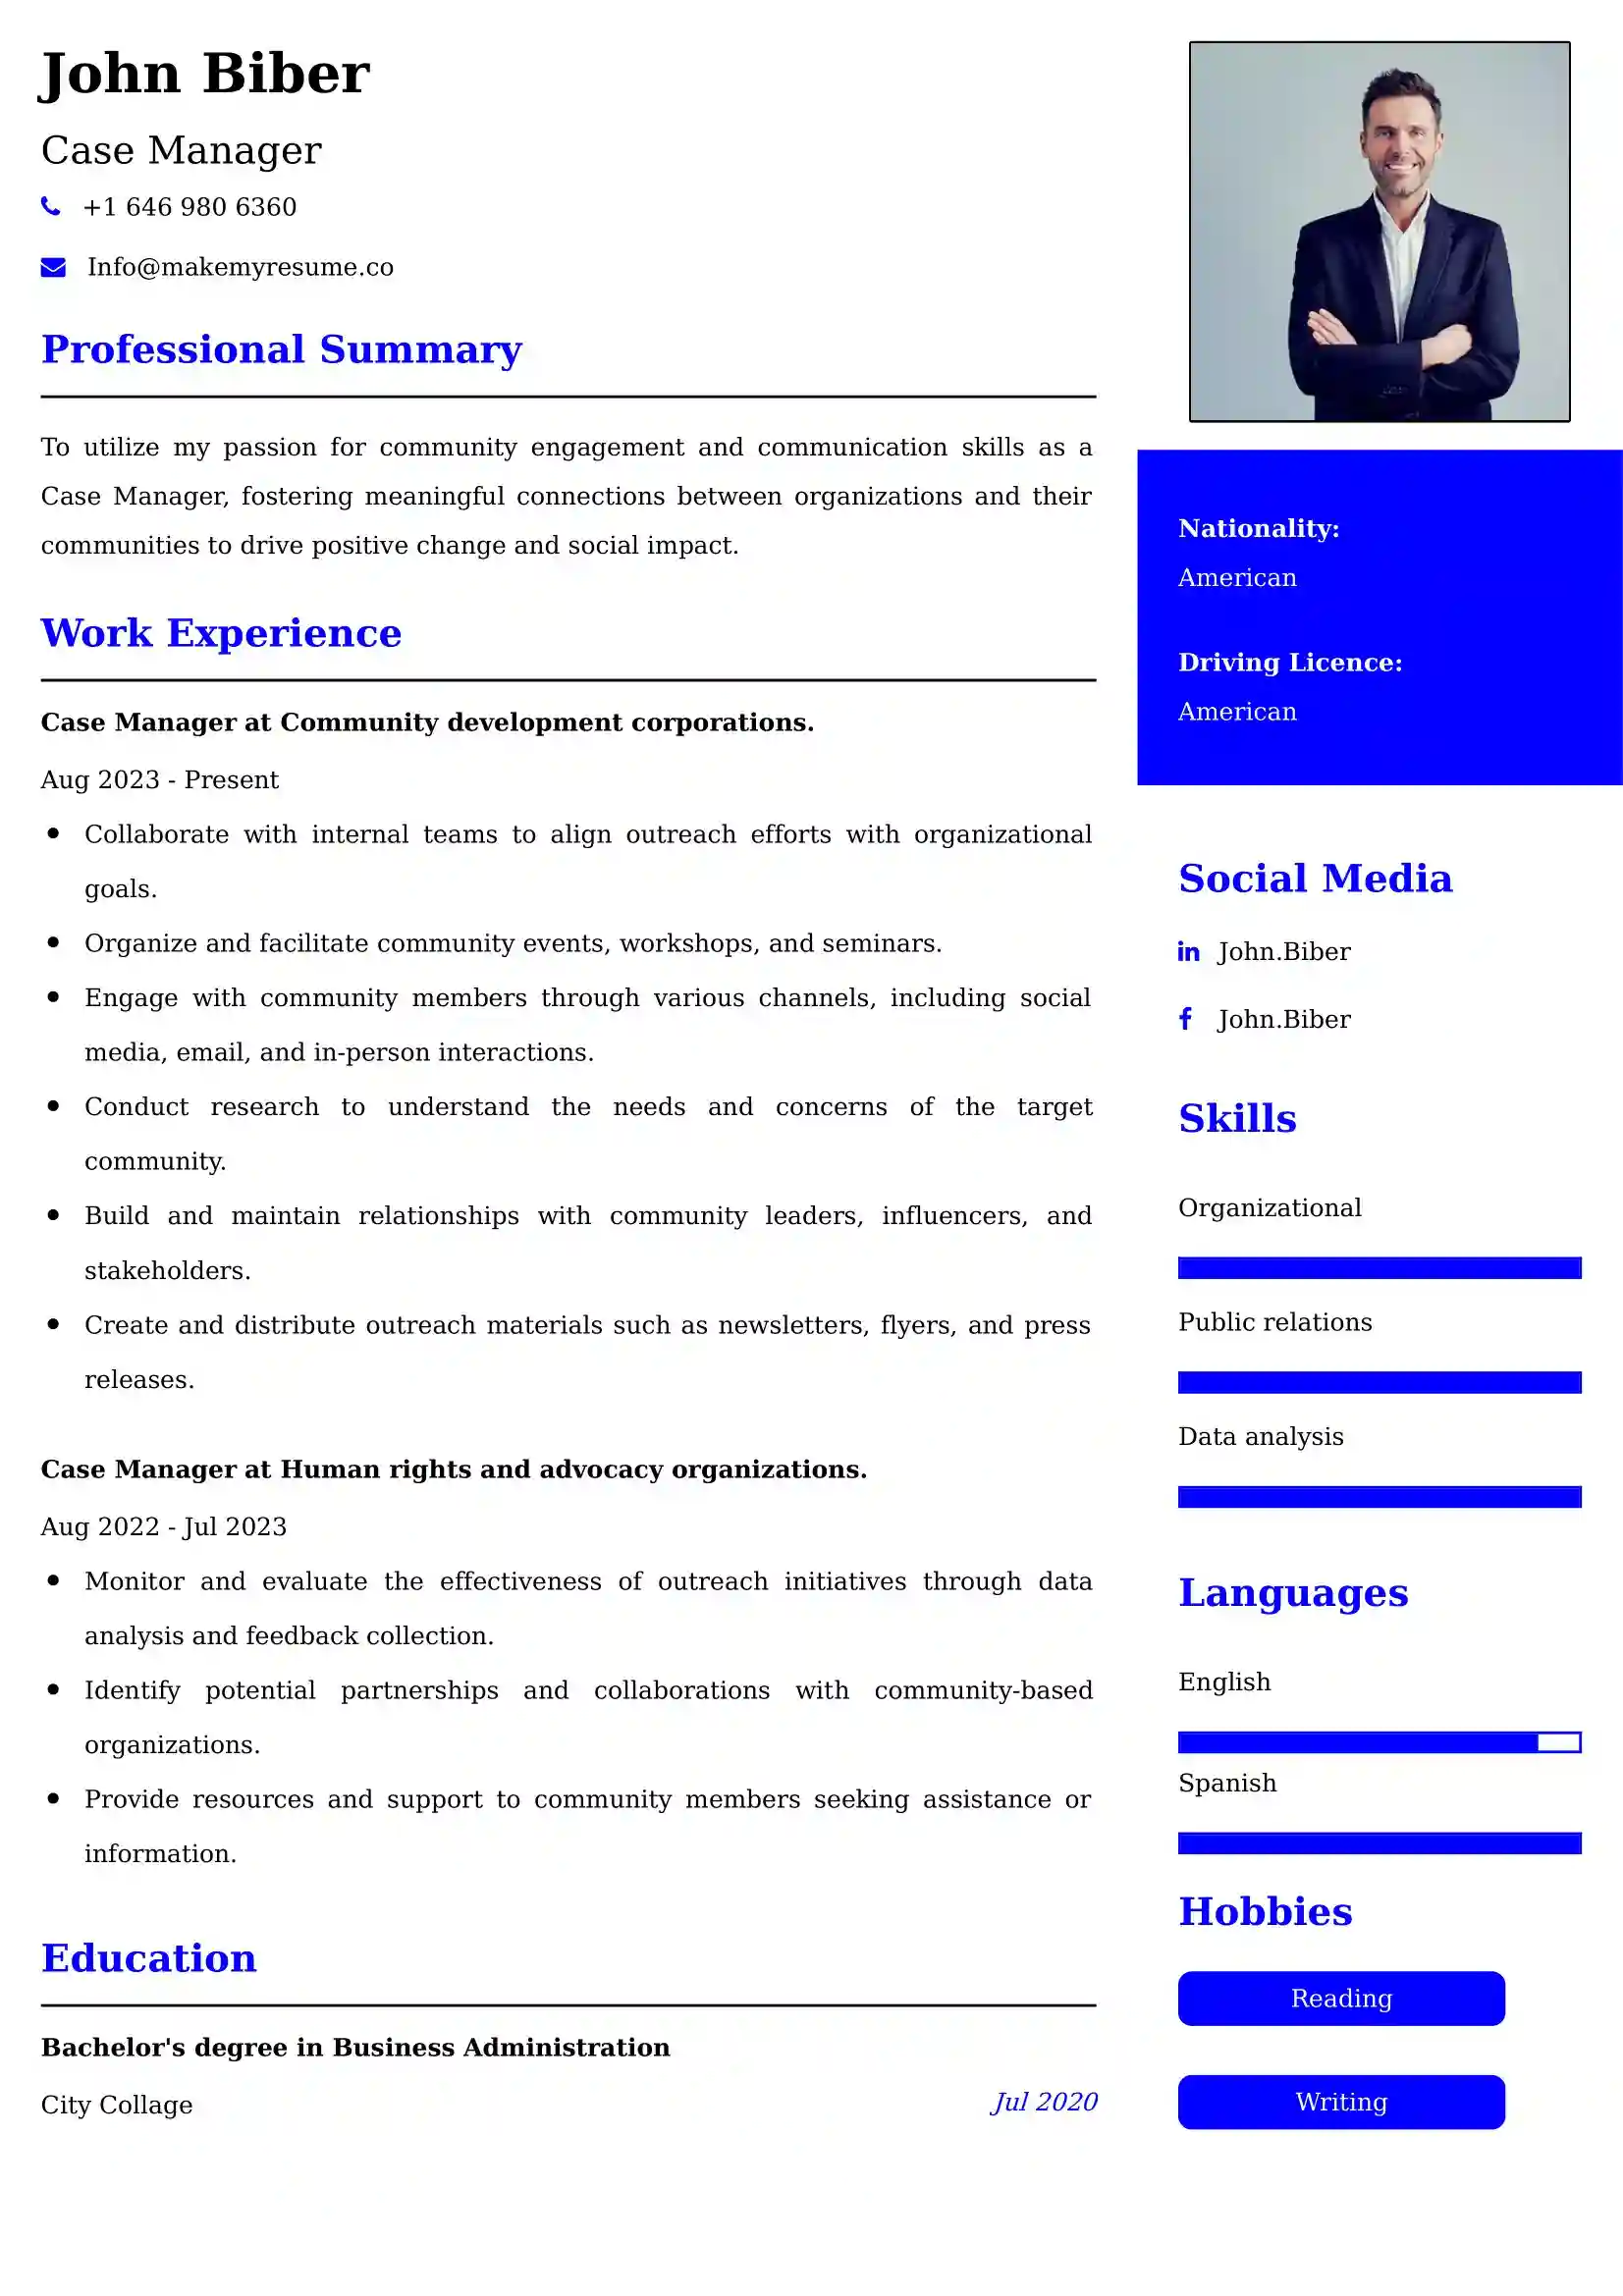 Case Manager Resume Examples - UK Format, Latest Template.